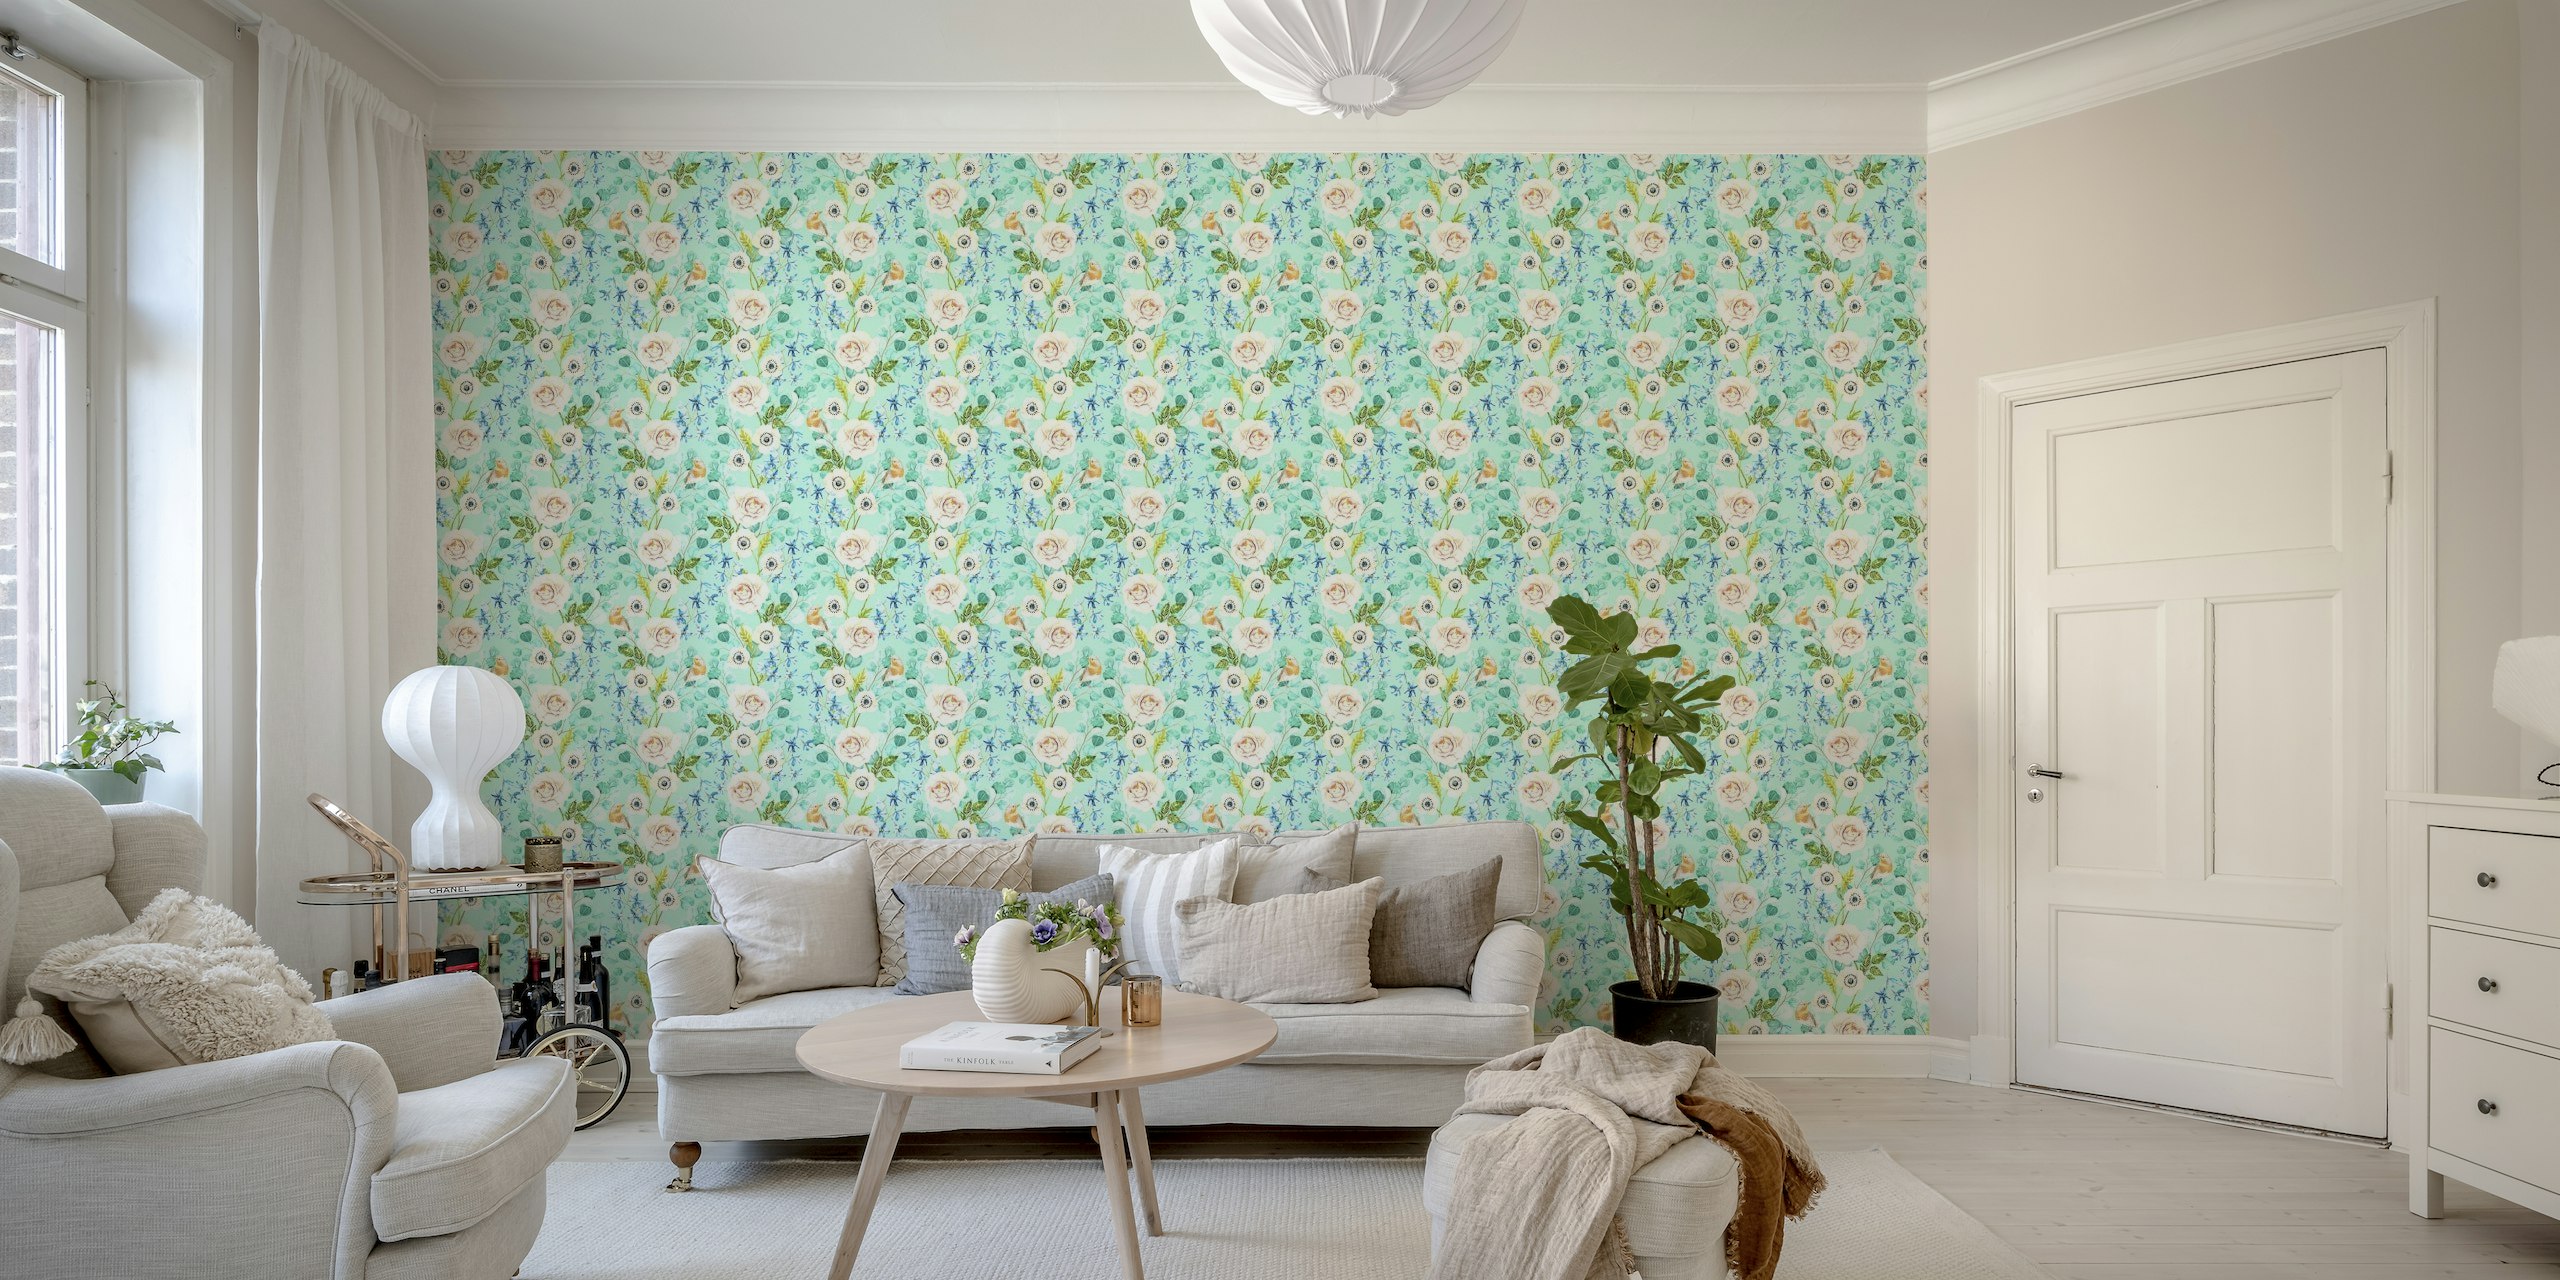 Handpainted flowers and birds on mint green wallpaper